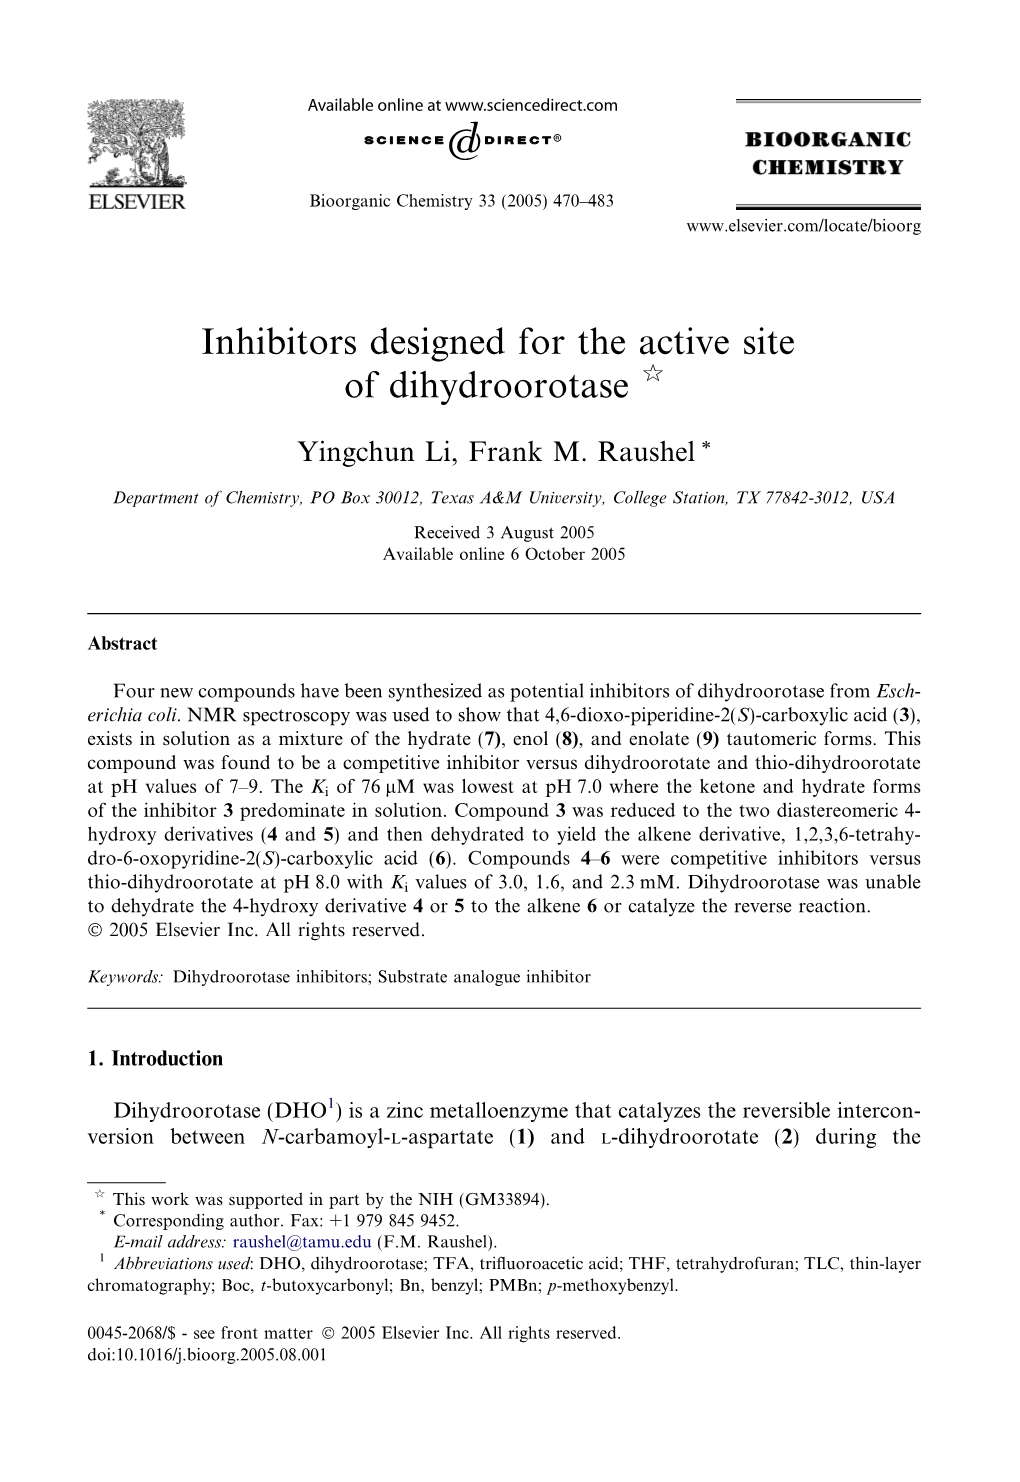 Inhibitors Designed for the Active Site of Dihydroorotase Q